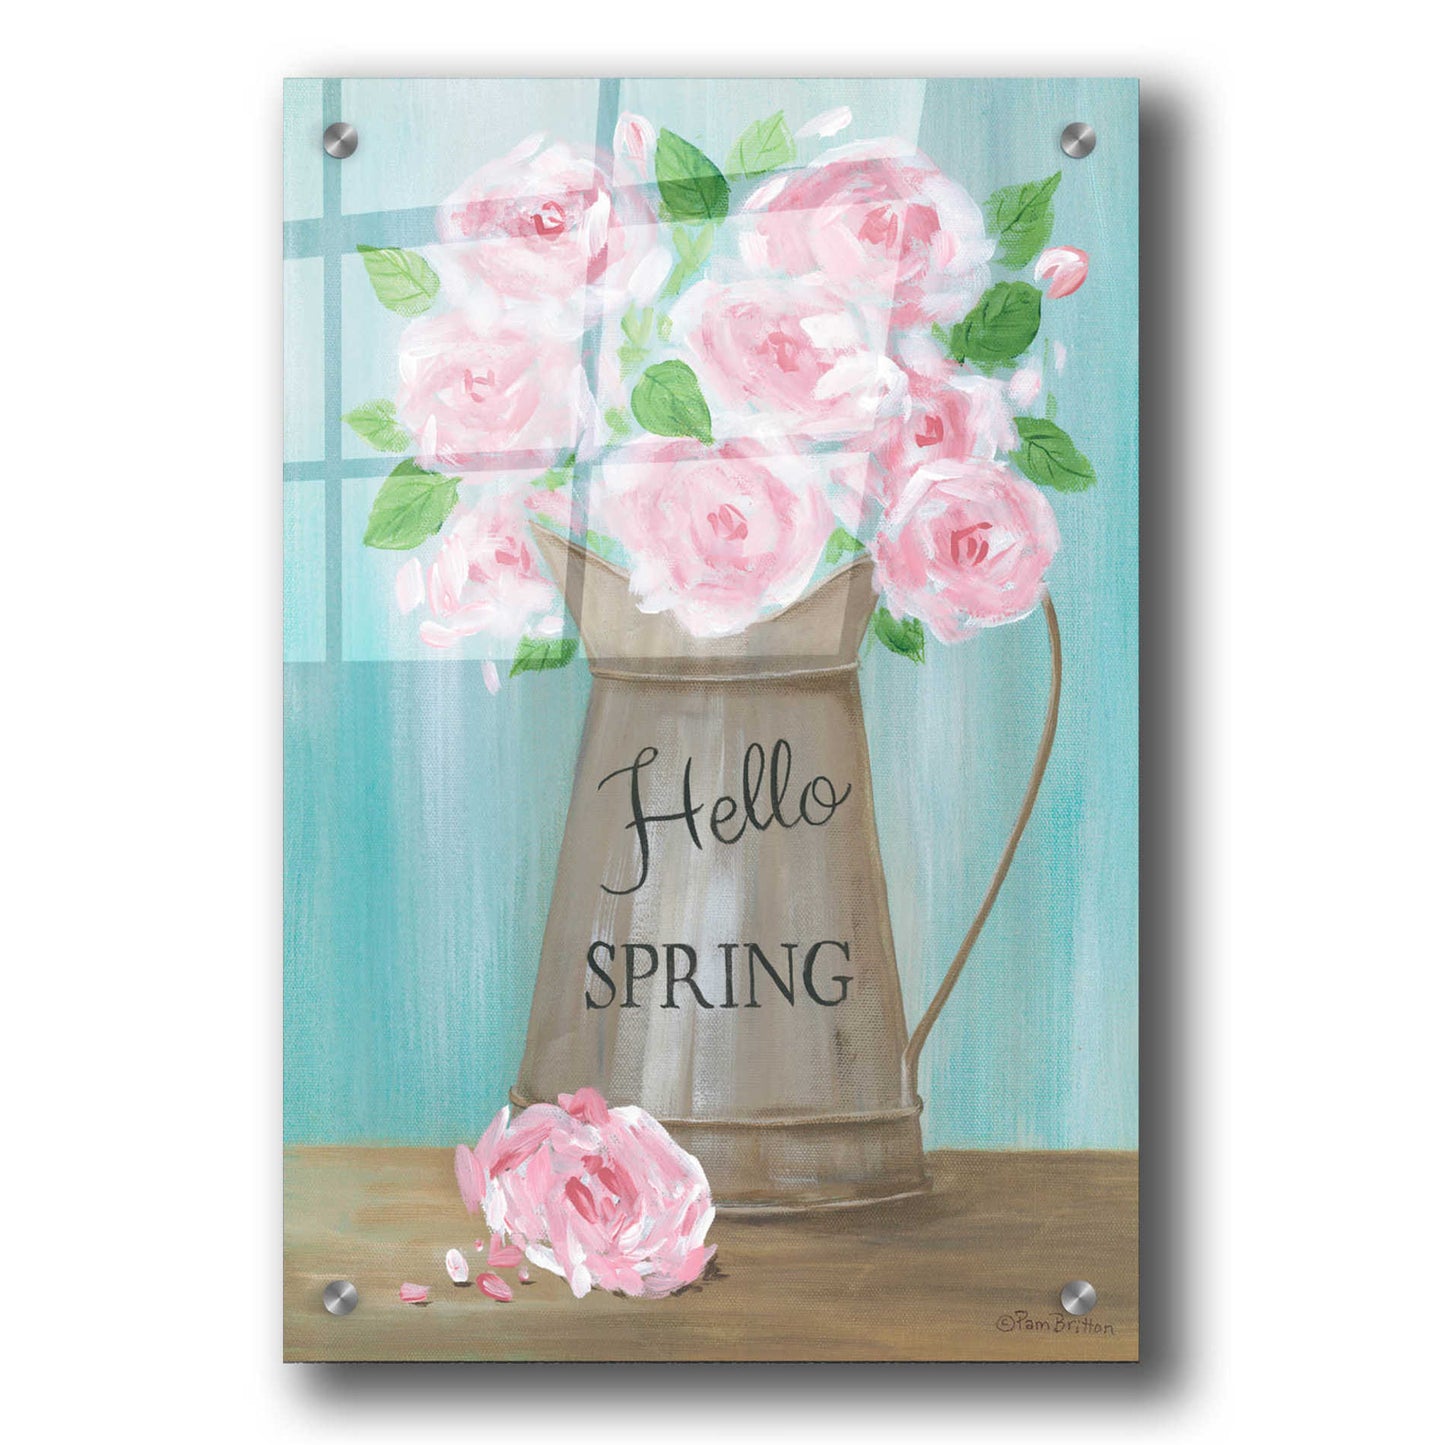 Epic Art 'Hello Spring Roses' by Pam Britton, Acrylic Glass Wall Art,24x36